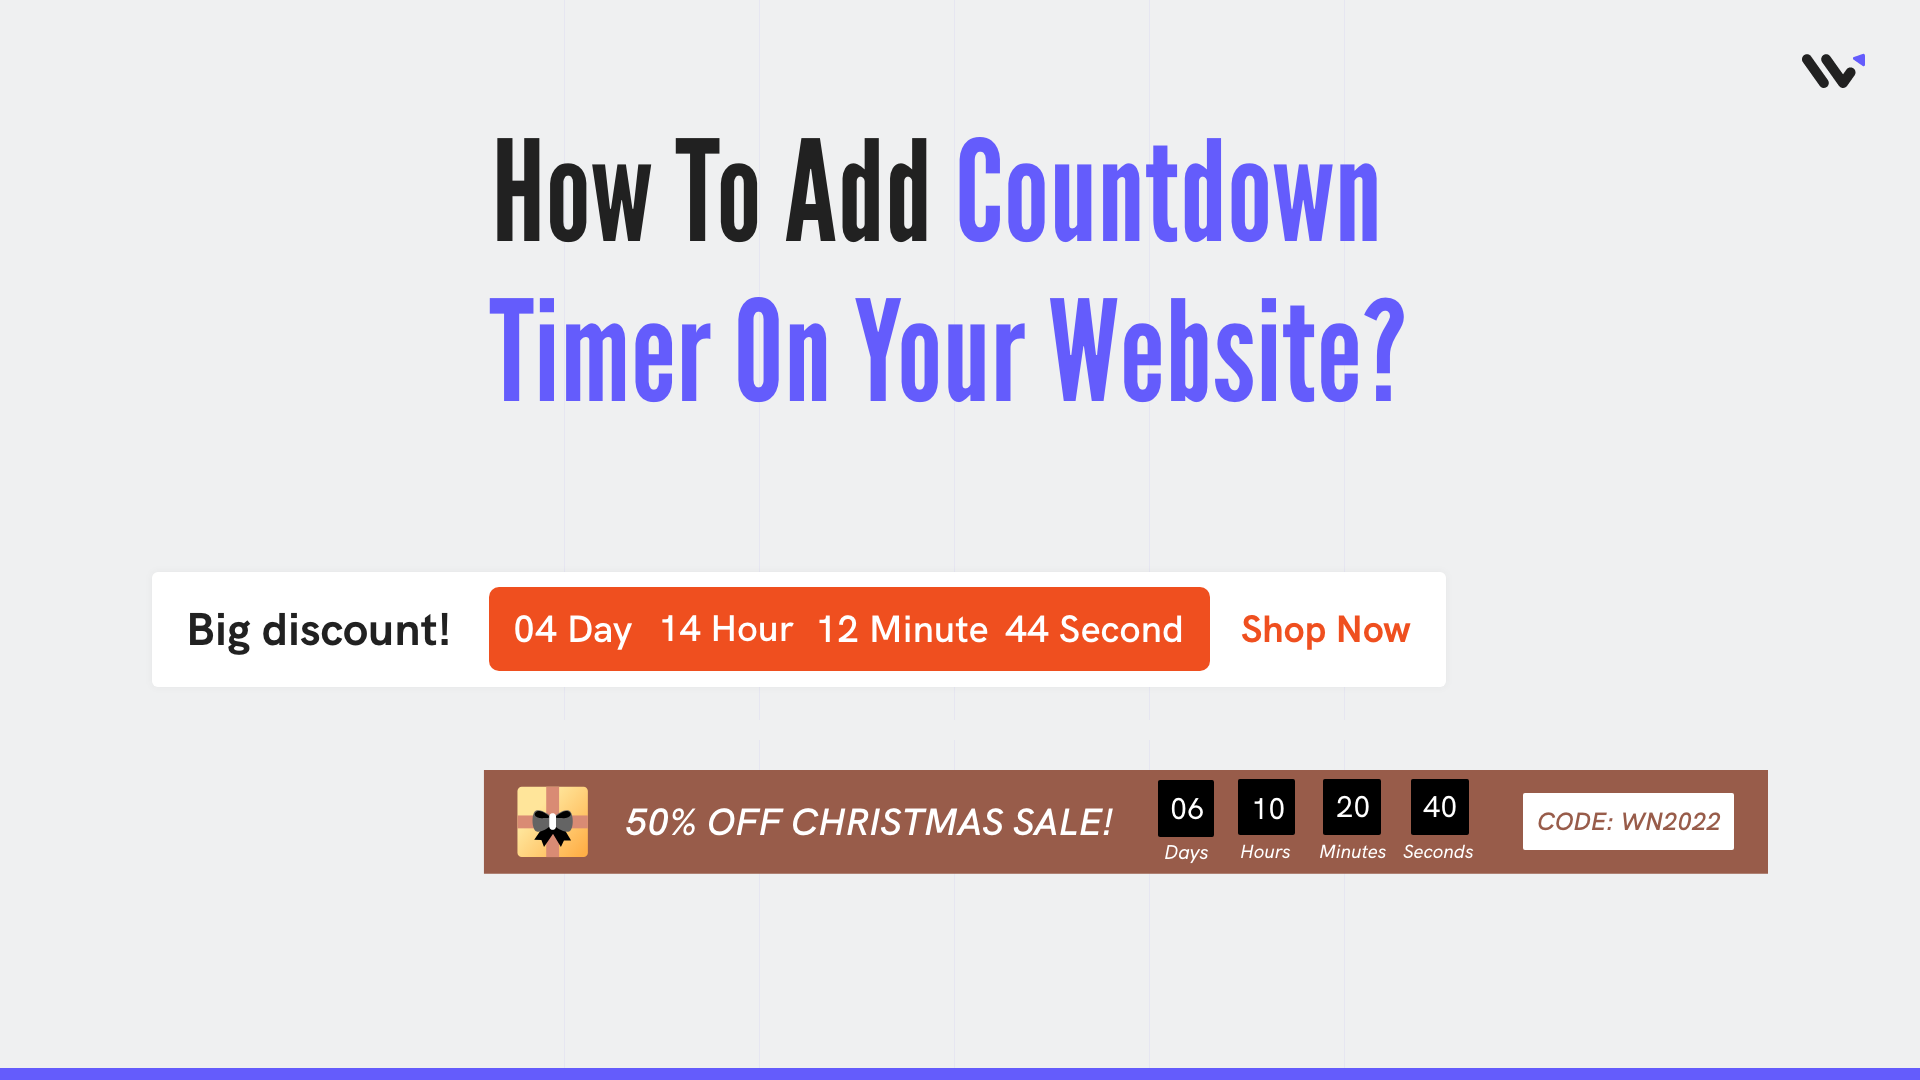 https://wisernotify.com/wp-content/uploads/2022/04/How-to-add-countdown-timer-on-your-website.png